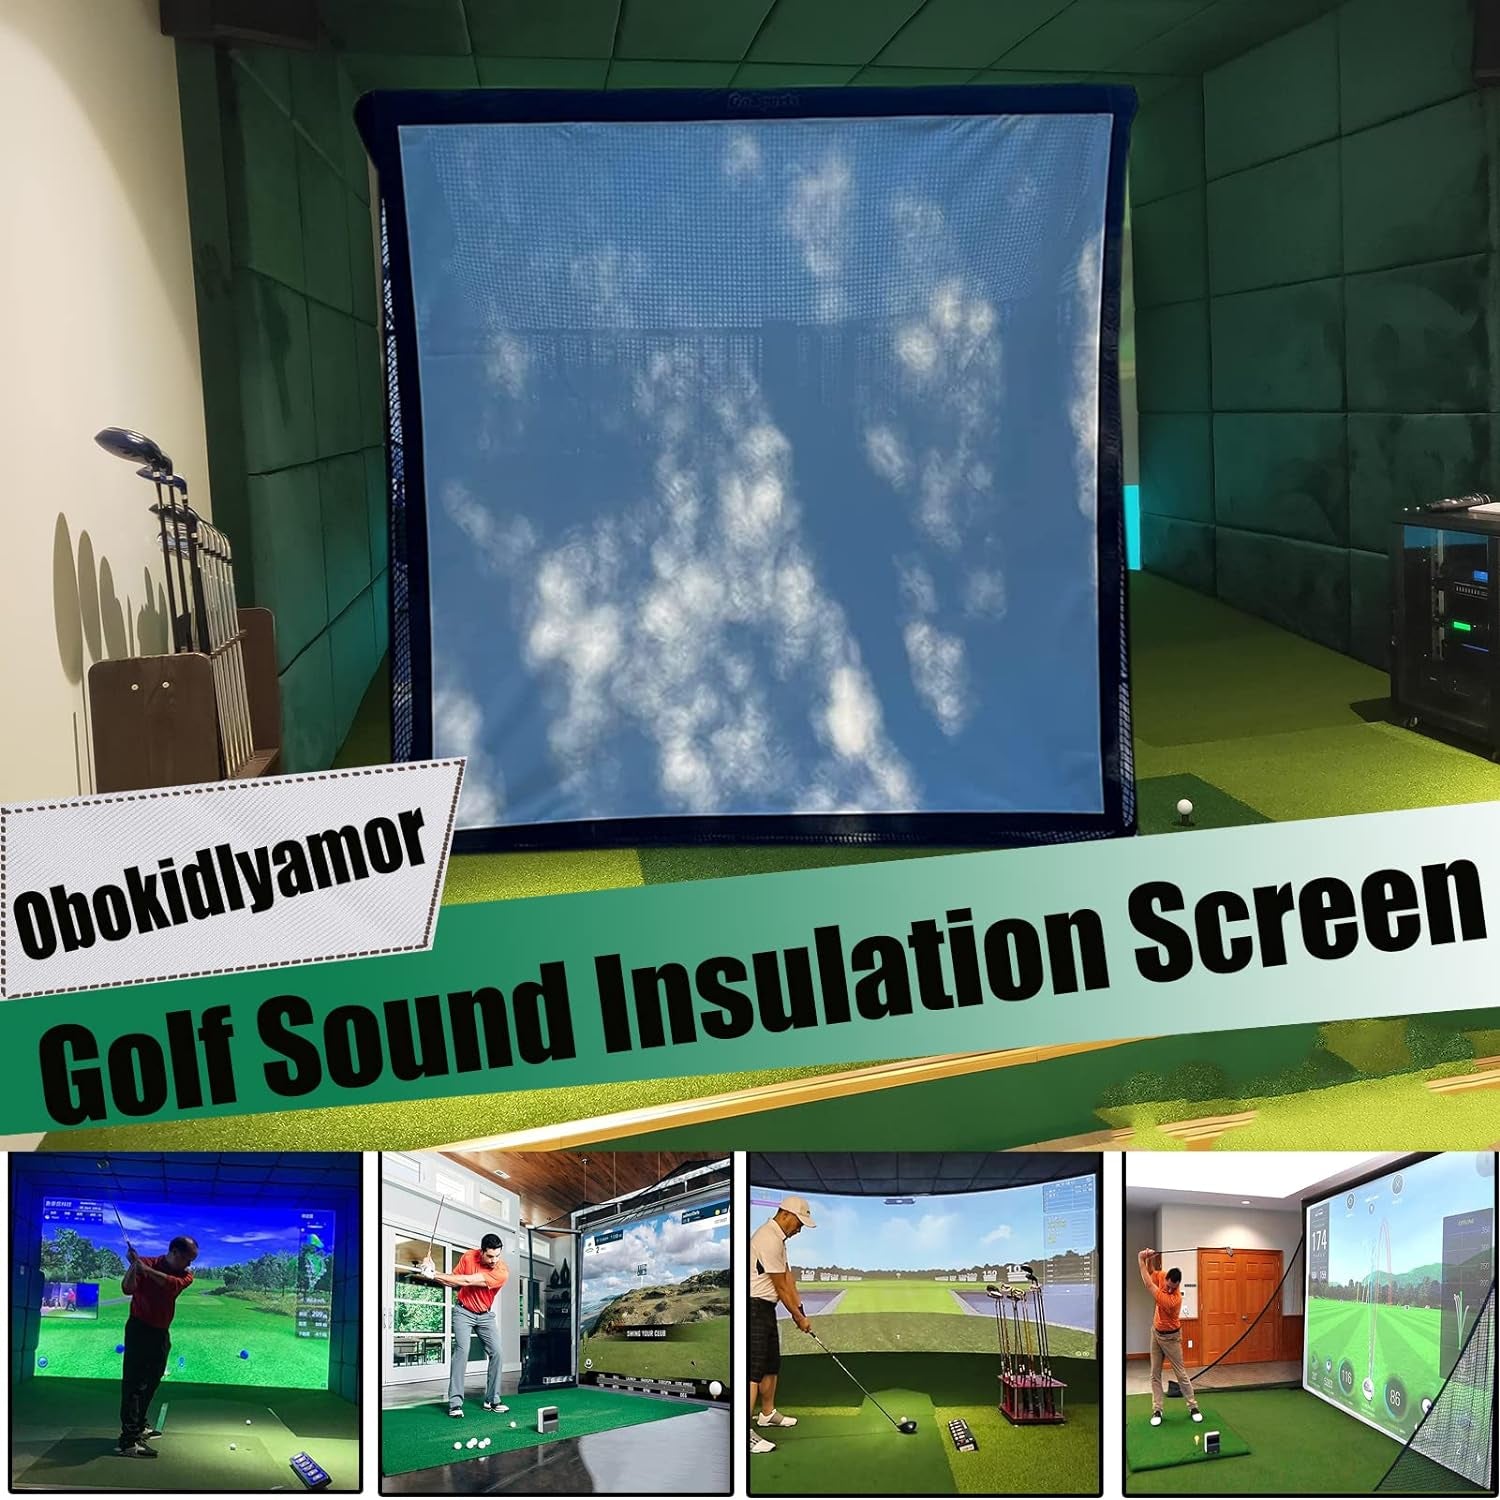 Golf Simulator Impact Screens Installed on Golf Hitting Net Frame- Sim Ball Simulator Impact Display Projection Screen with 10Pcs Grommet Ropes for Outdoor/Indoor/Home